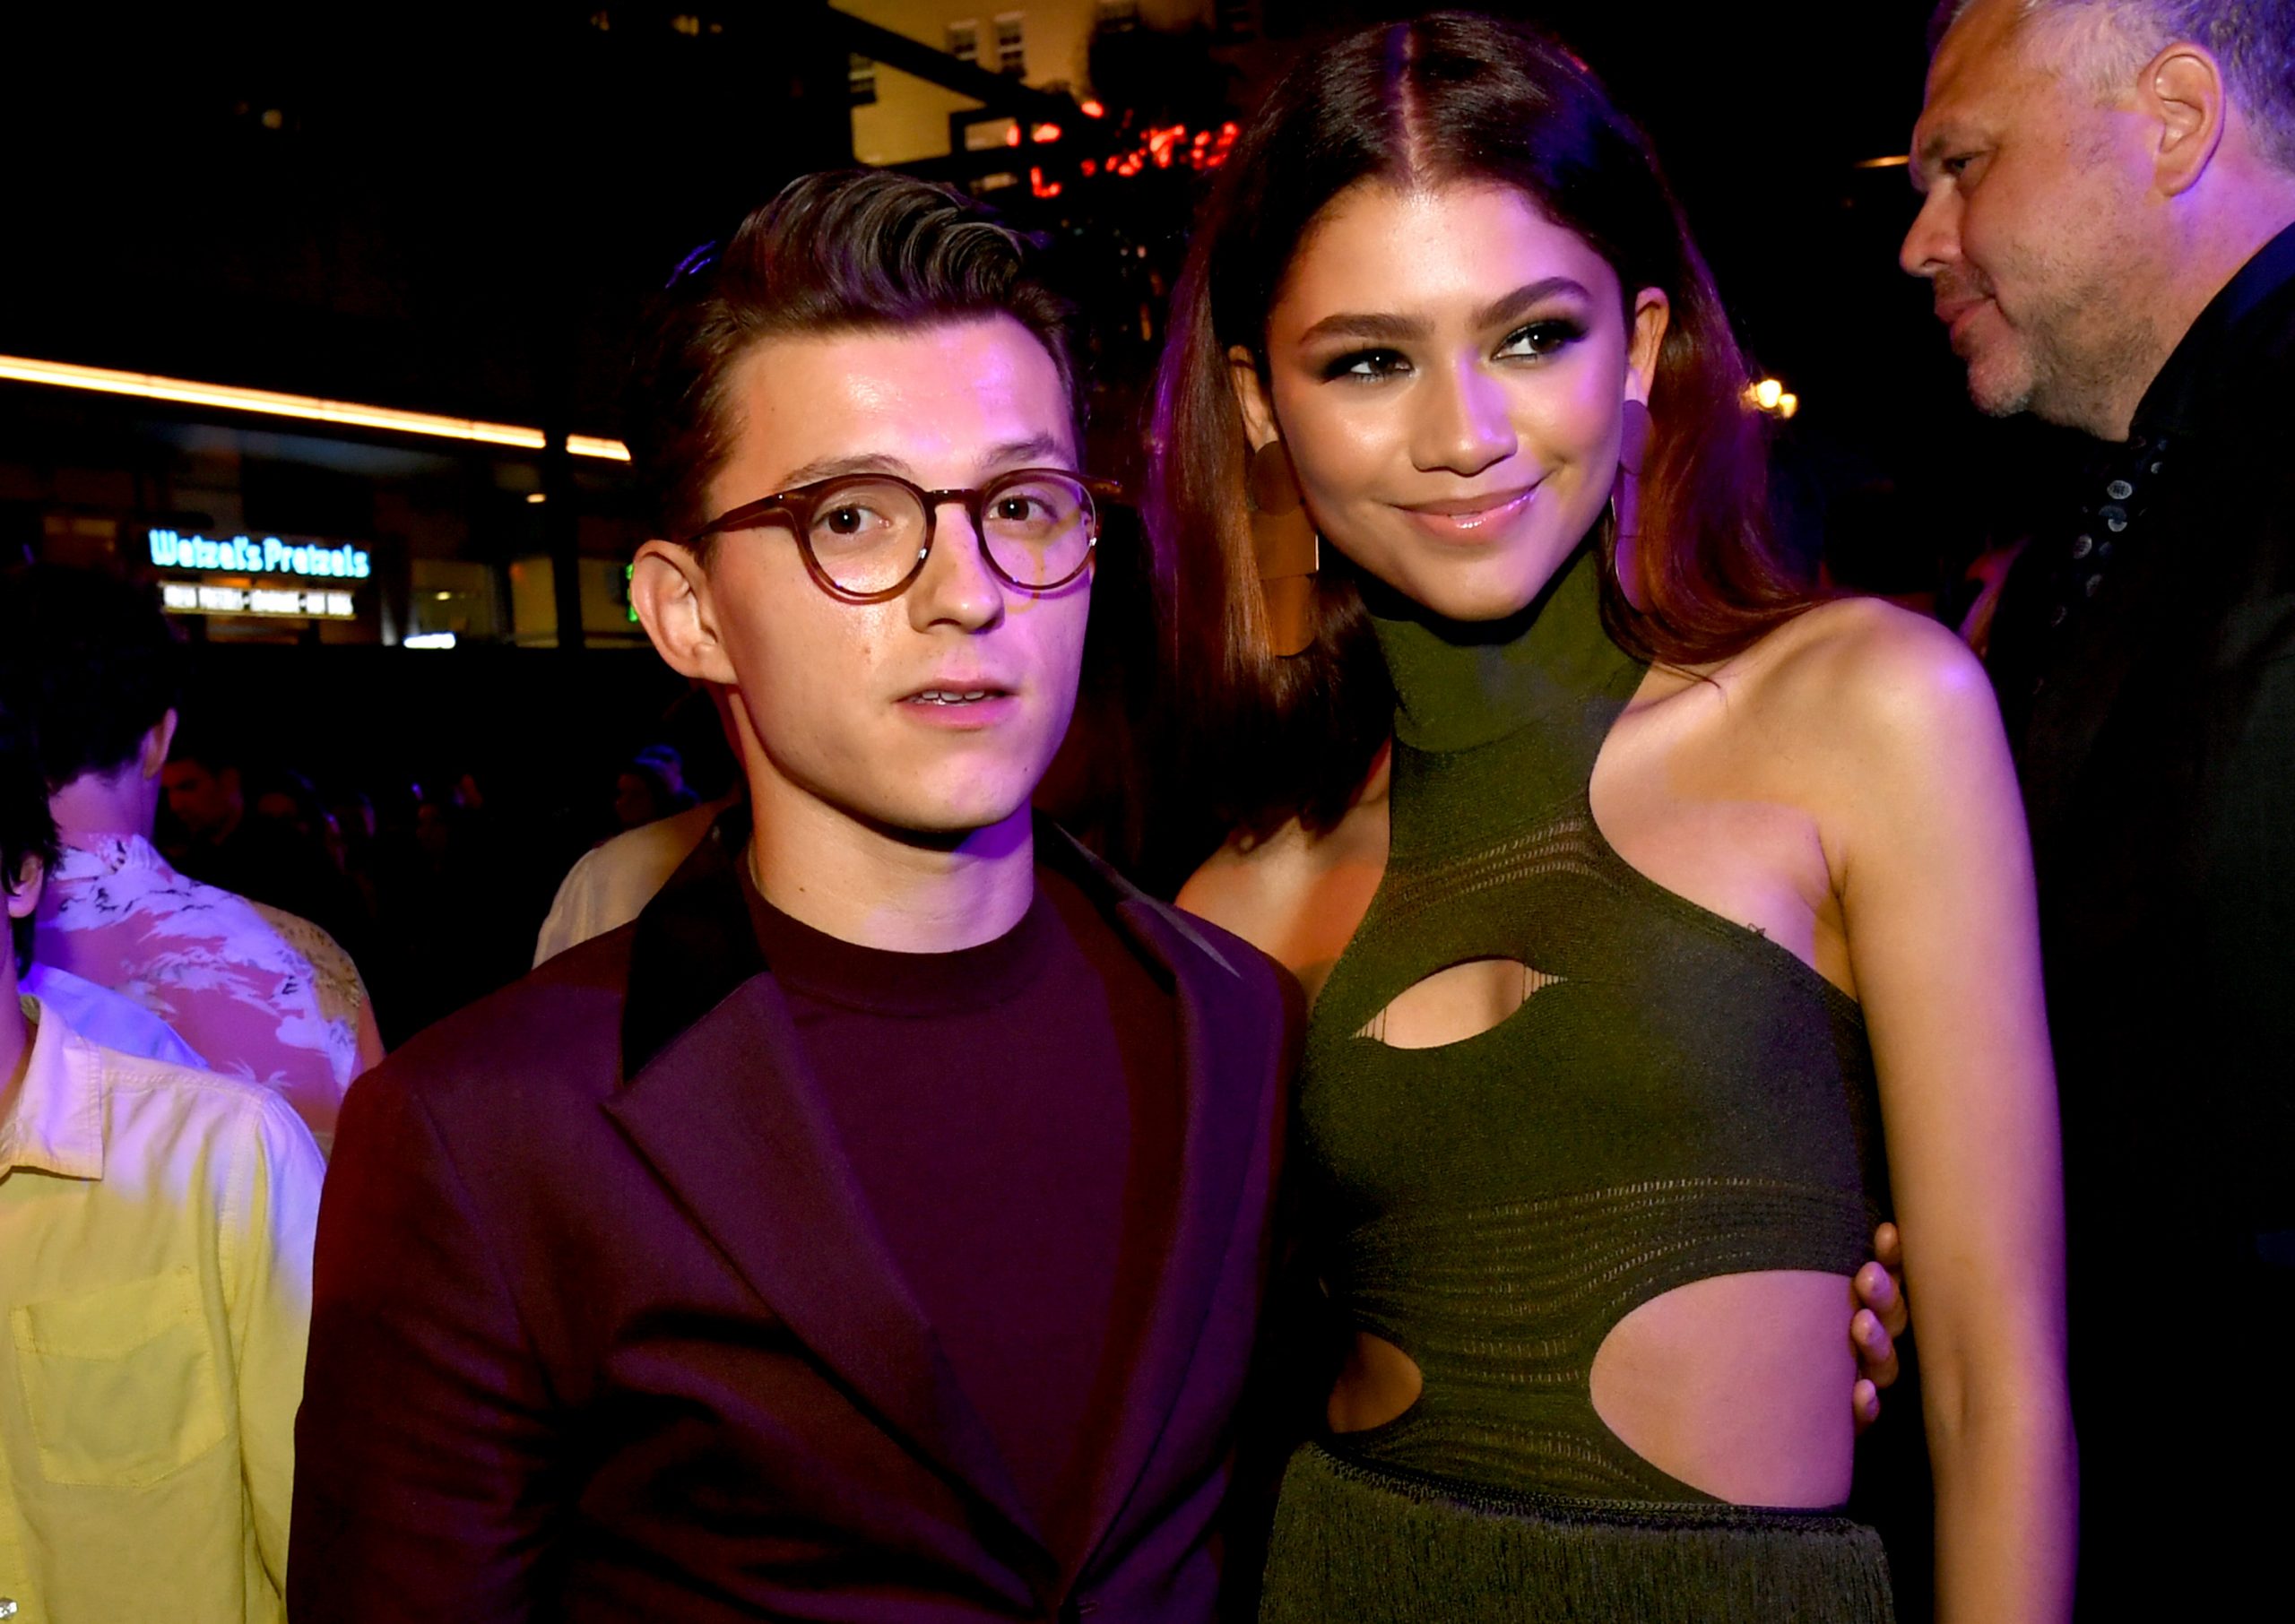 Spider Man' Actor Tom Holland Addresses The Photo Of Him And Zendaya